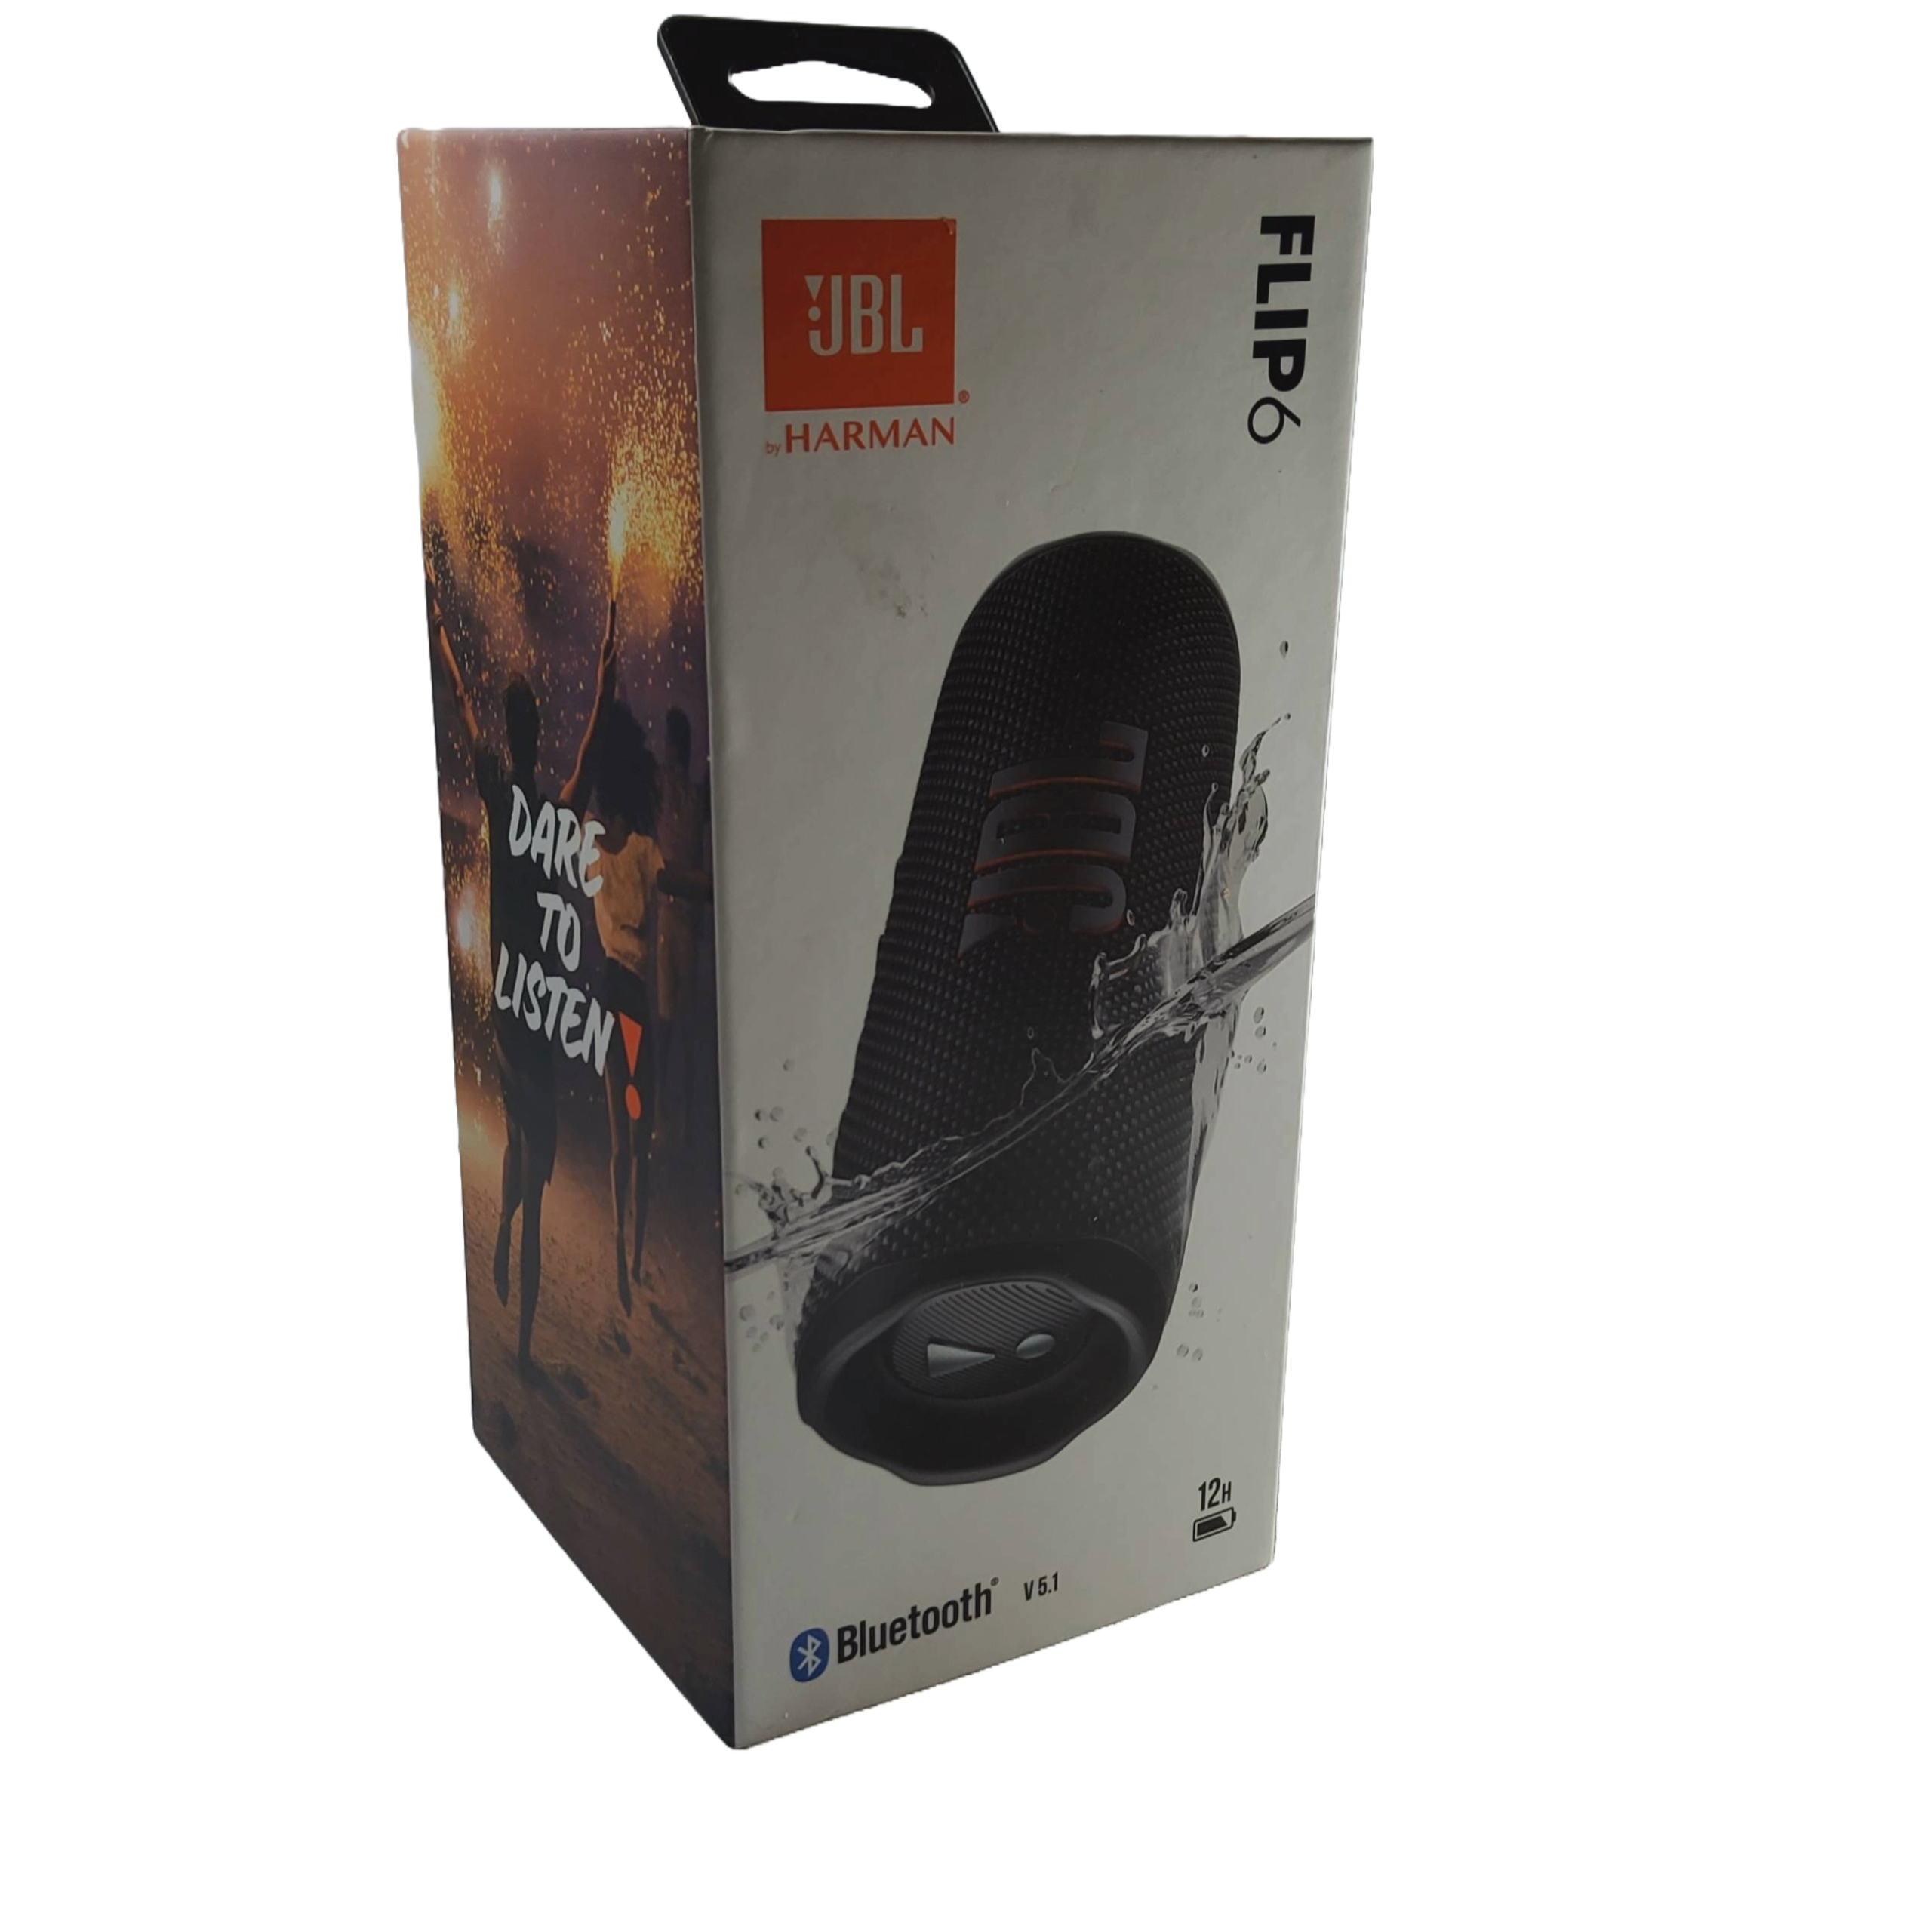 JBL Flip 6 Portable Bluetooth Speaker, Powerful Sound and Deep bass, IPX7 Waterproof, 12 Hours of Playtime, JBL PartyBoost, Speaker for Home, Outdoor, Travel (Black)